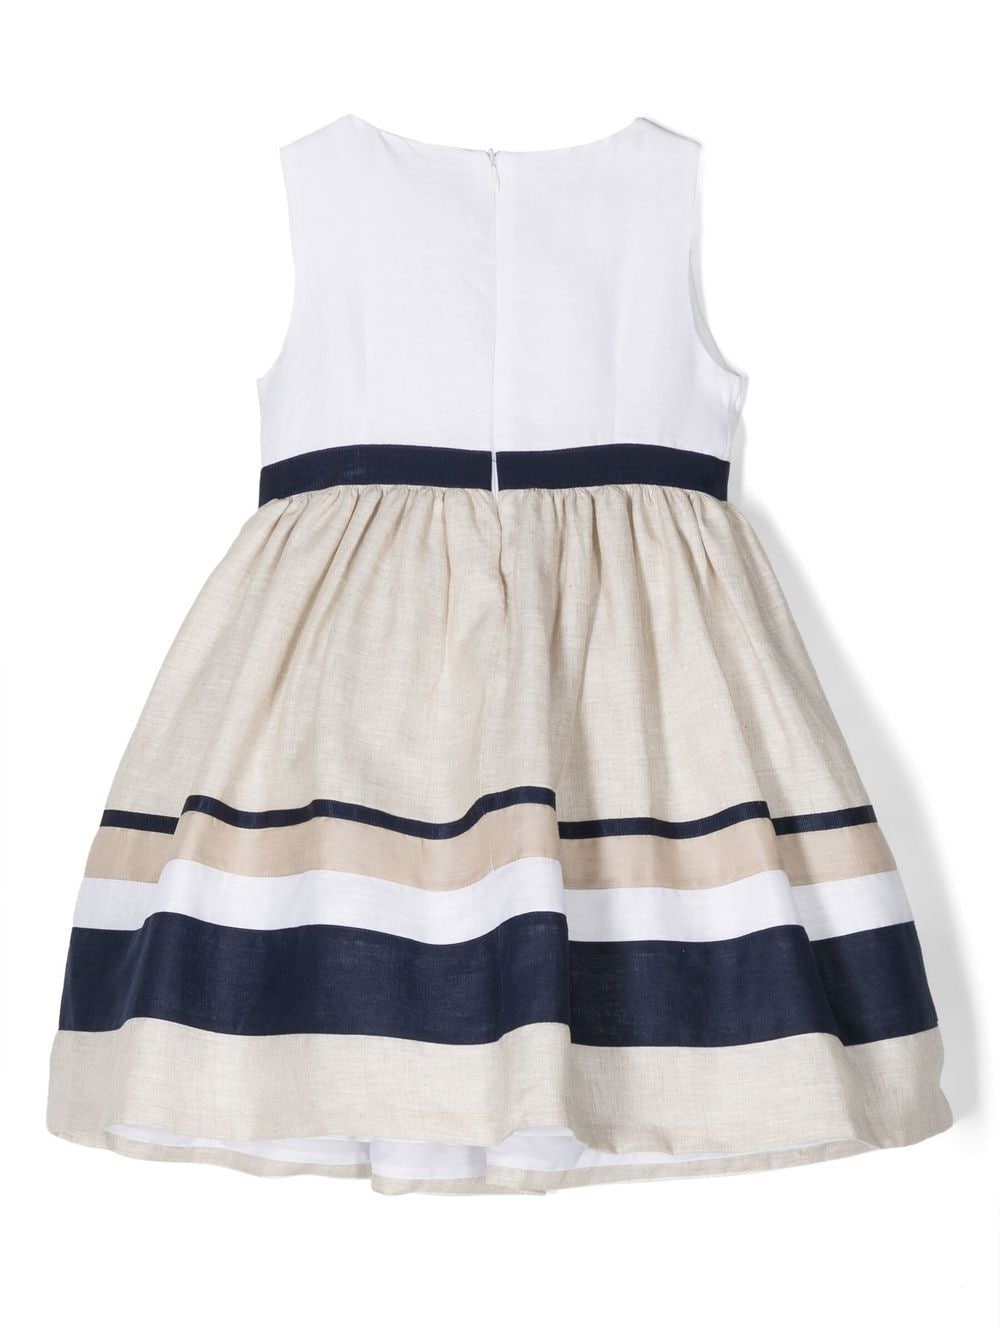 White, beige and blue dress for girls